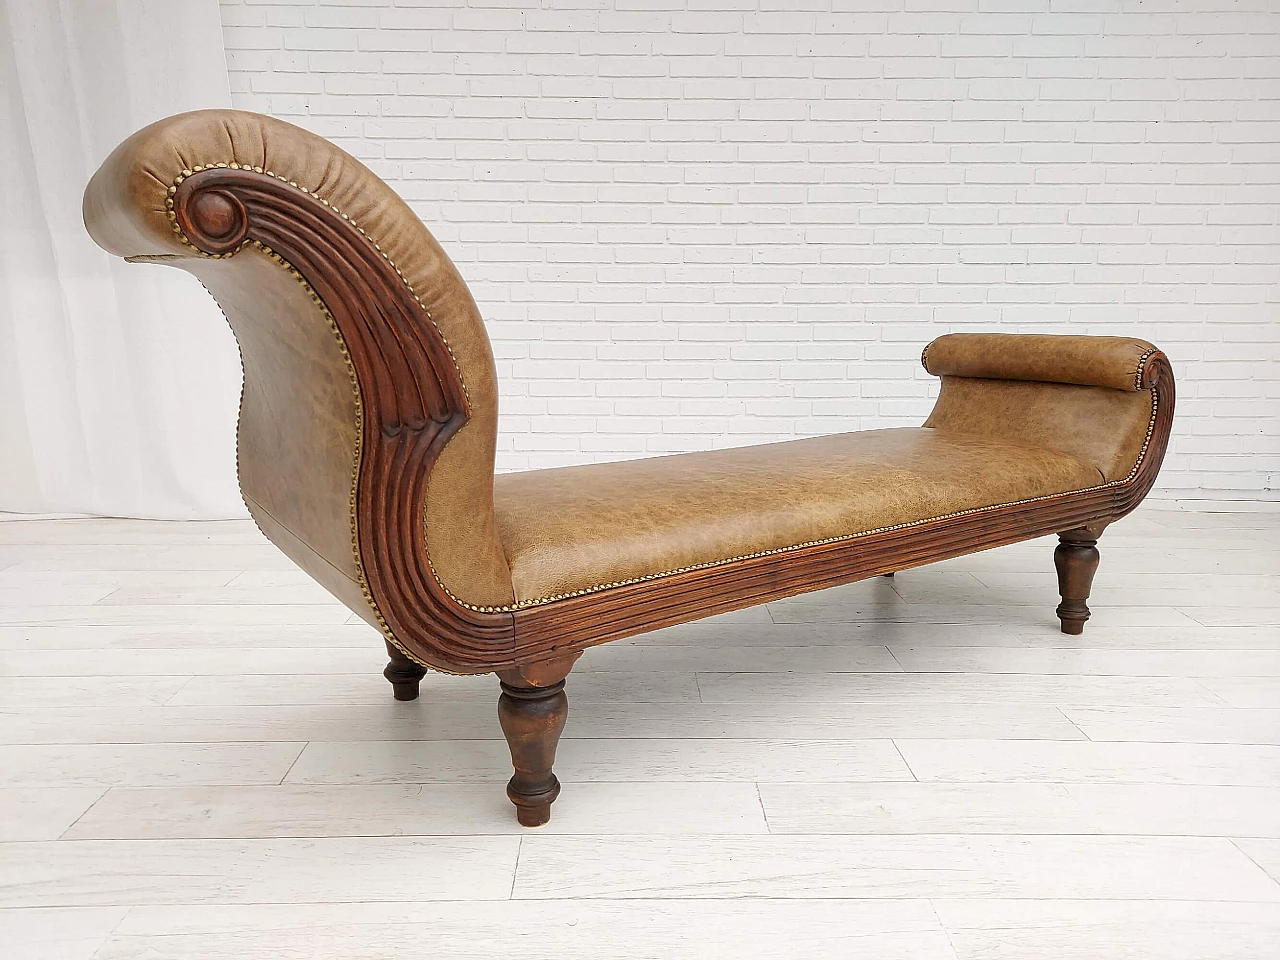 Danish antique chaise longue, early 20th century 1142175